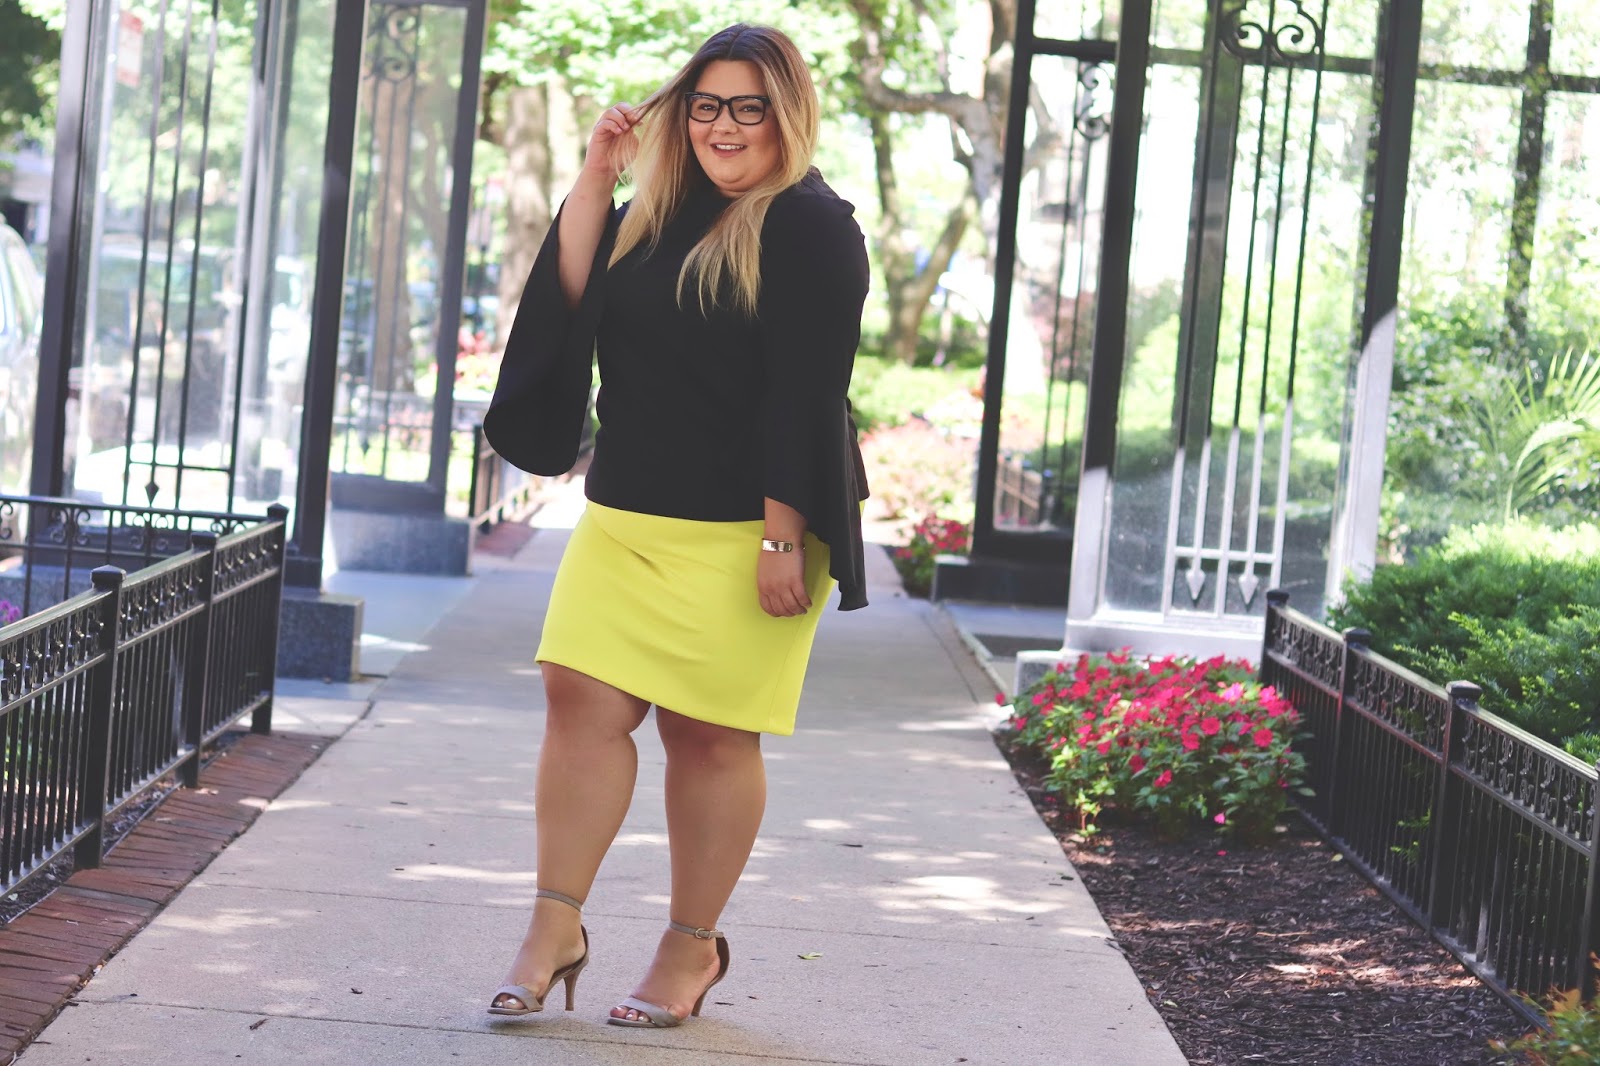 eloquii, chicago, Chicago fashion, natalie craig, natalie in the city, plus size office attire, plus size professional attire, plus size fashion blogger, affordable plus size fashion, eloquii Chicago, curves and confidence, midwest, plus size neoprene, blogger review